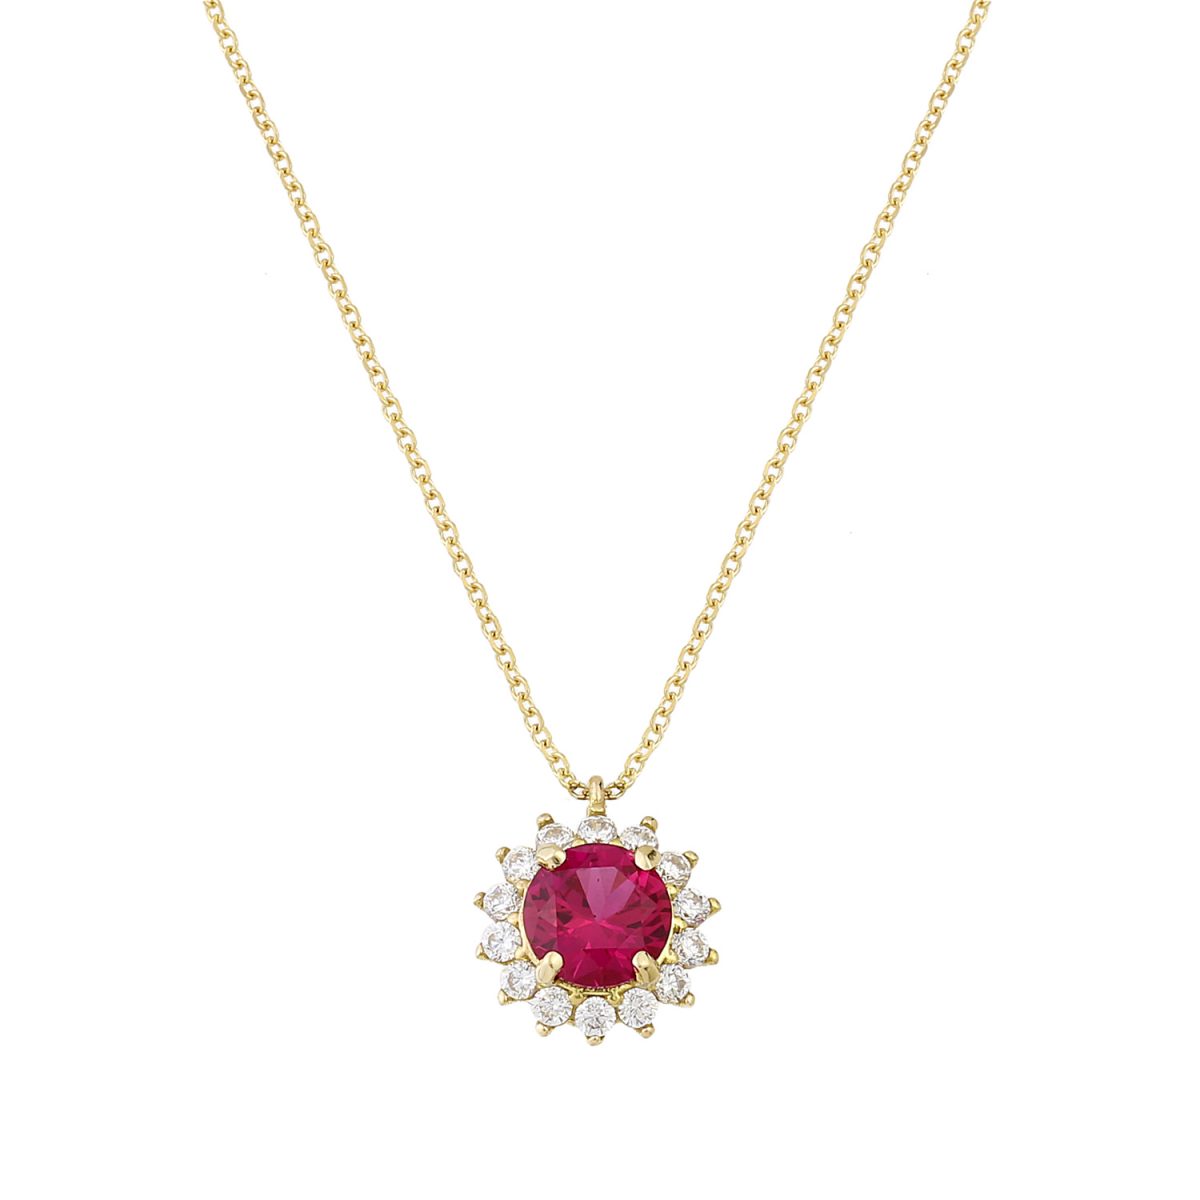 Rosette necklace with Red stone